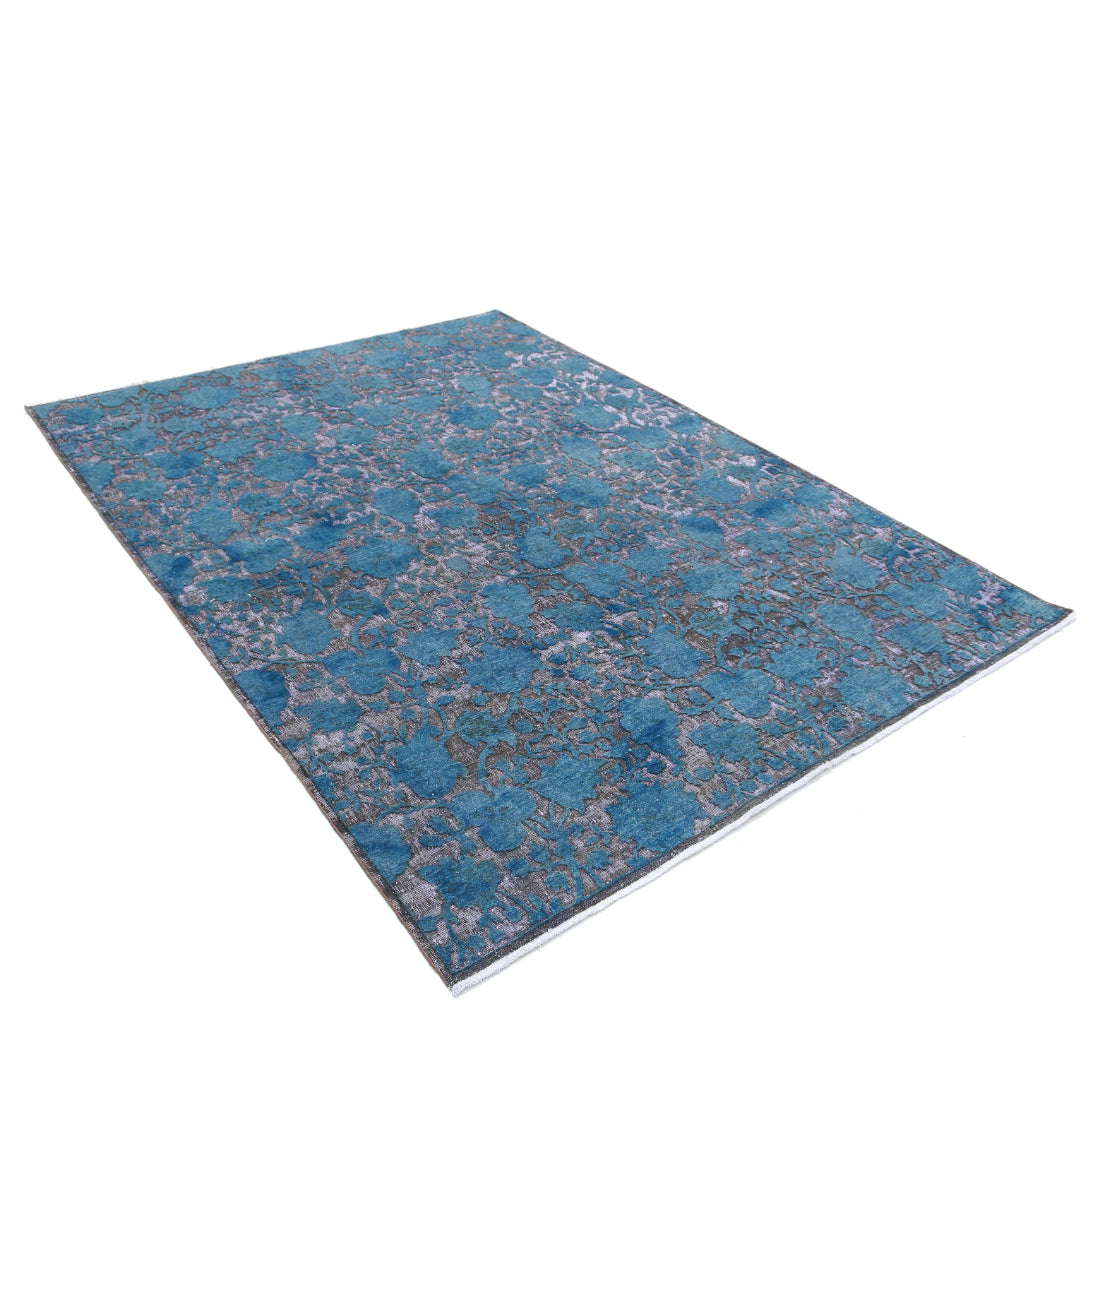 Hand Knotted Onyx Wool Rug - 6'0'' x 8'0'' 6'0'' x 8'0'' (180 X 240) / Blue / Charcoal